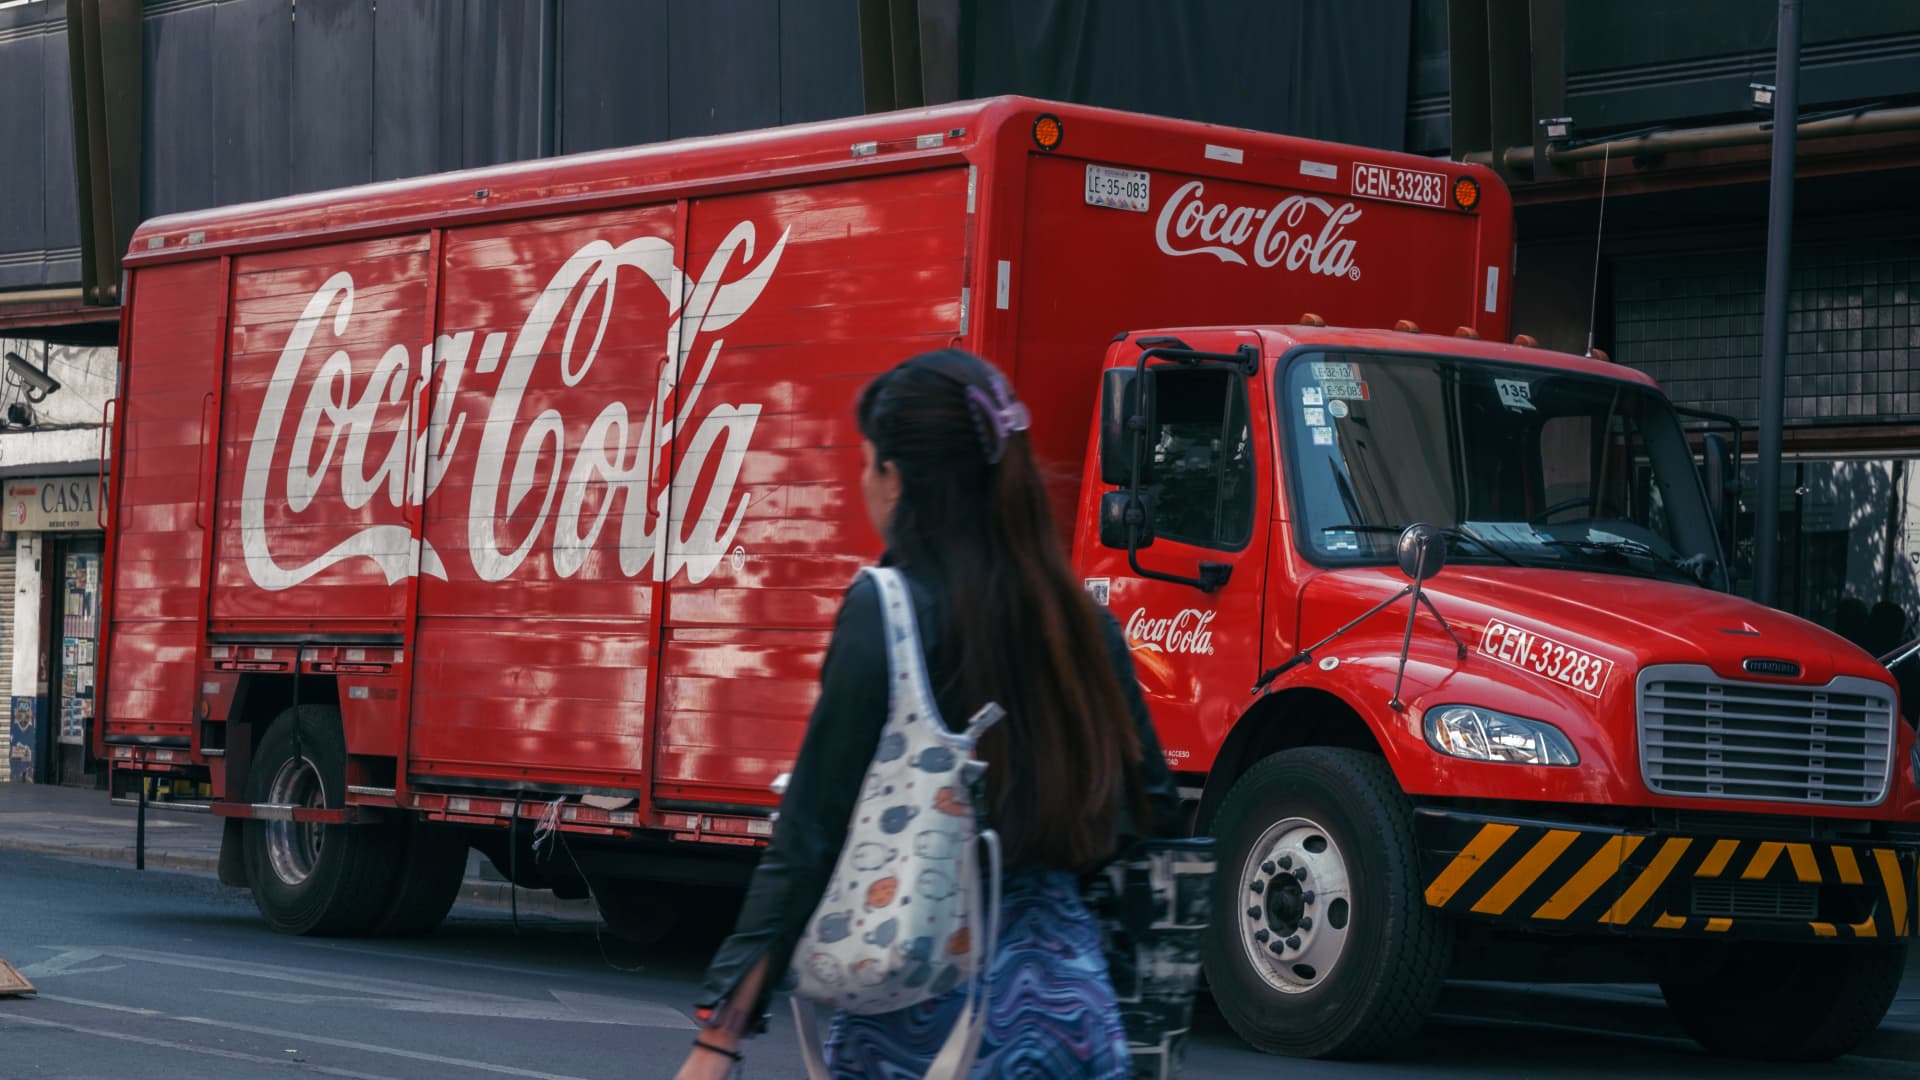 Coca-Cola says it’s done raising prices in the U.S. and Europe this year